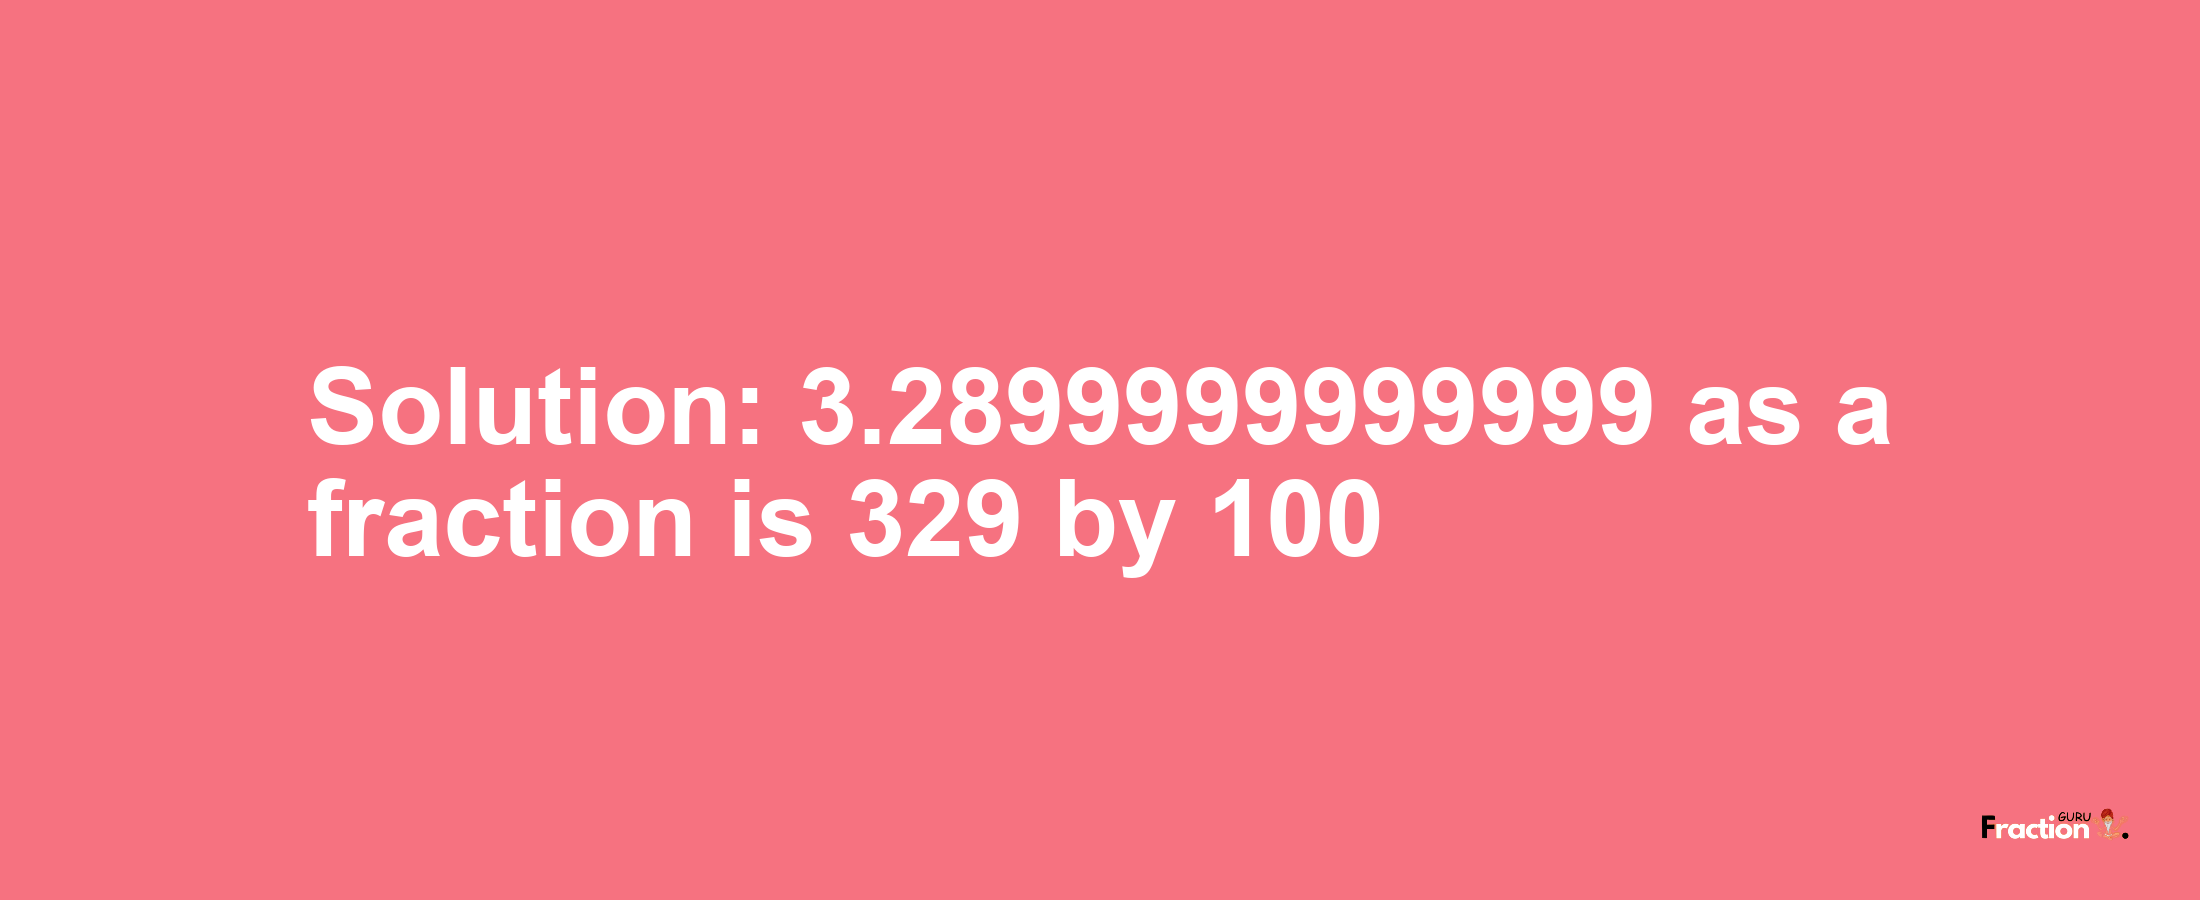 Solution:3.2899999999999 as a fraction is 329/100